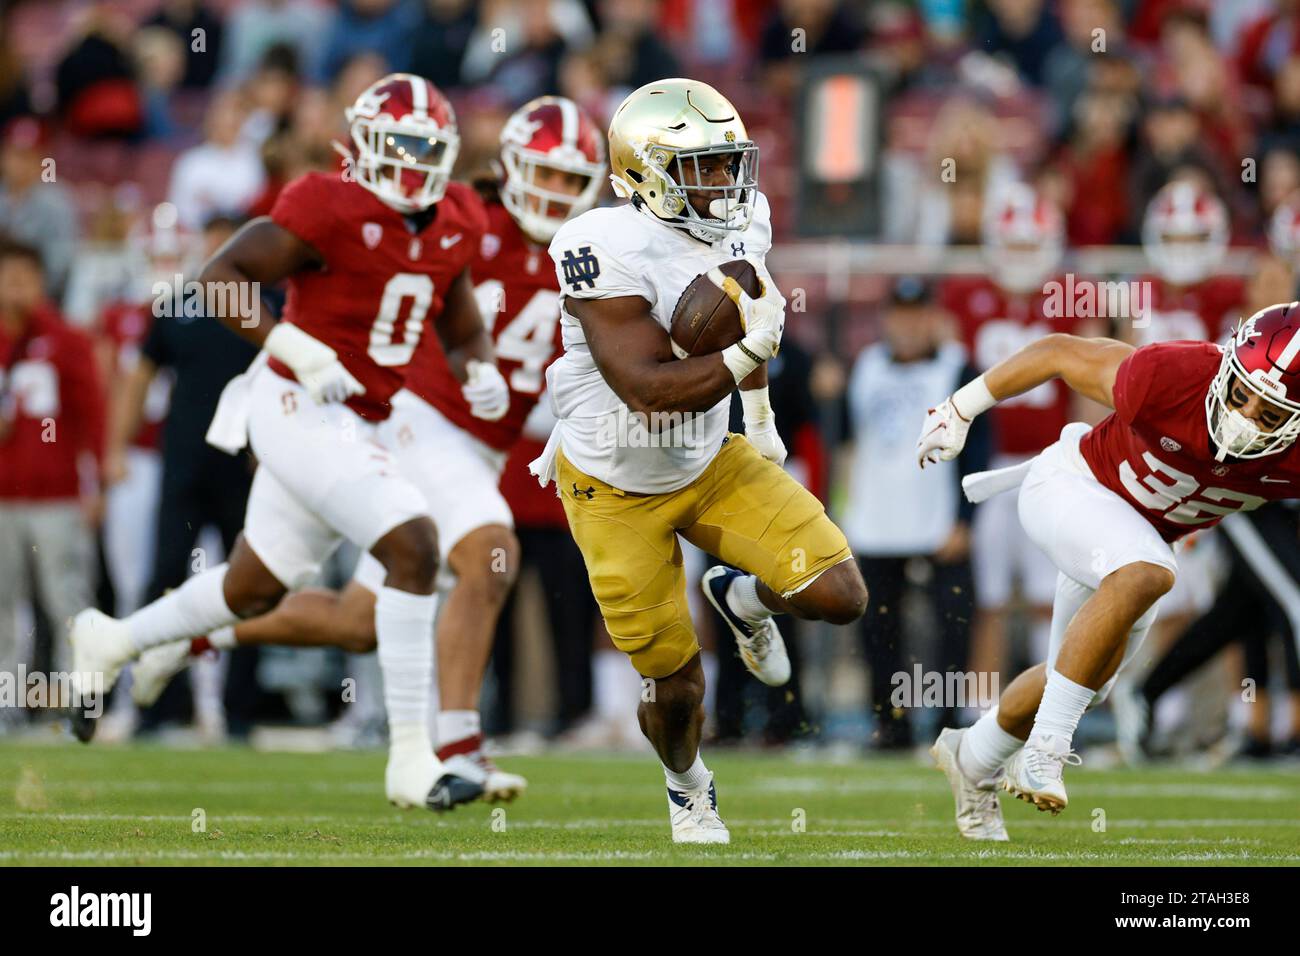 Notre Dame Fighting Irish running back Audric Estime (7) runs with the ball during a college football regular season game against the Stanford Cardina Stock Photo